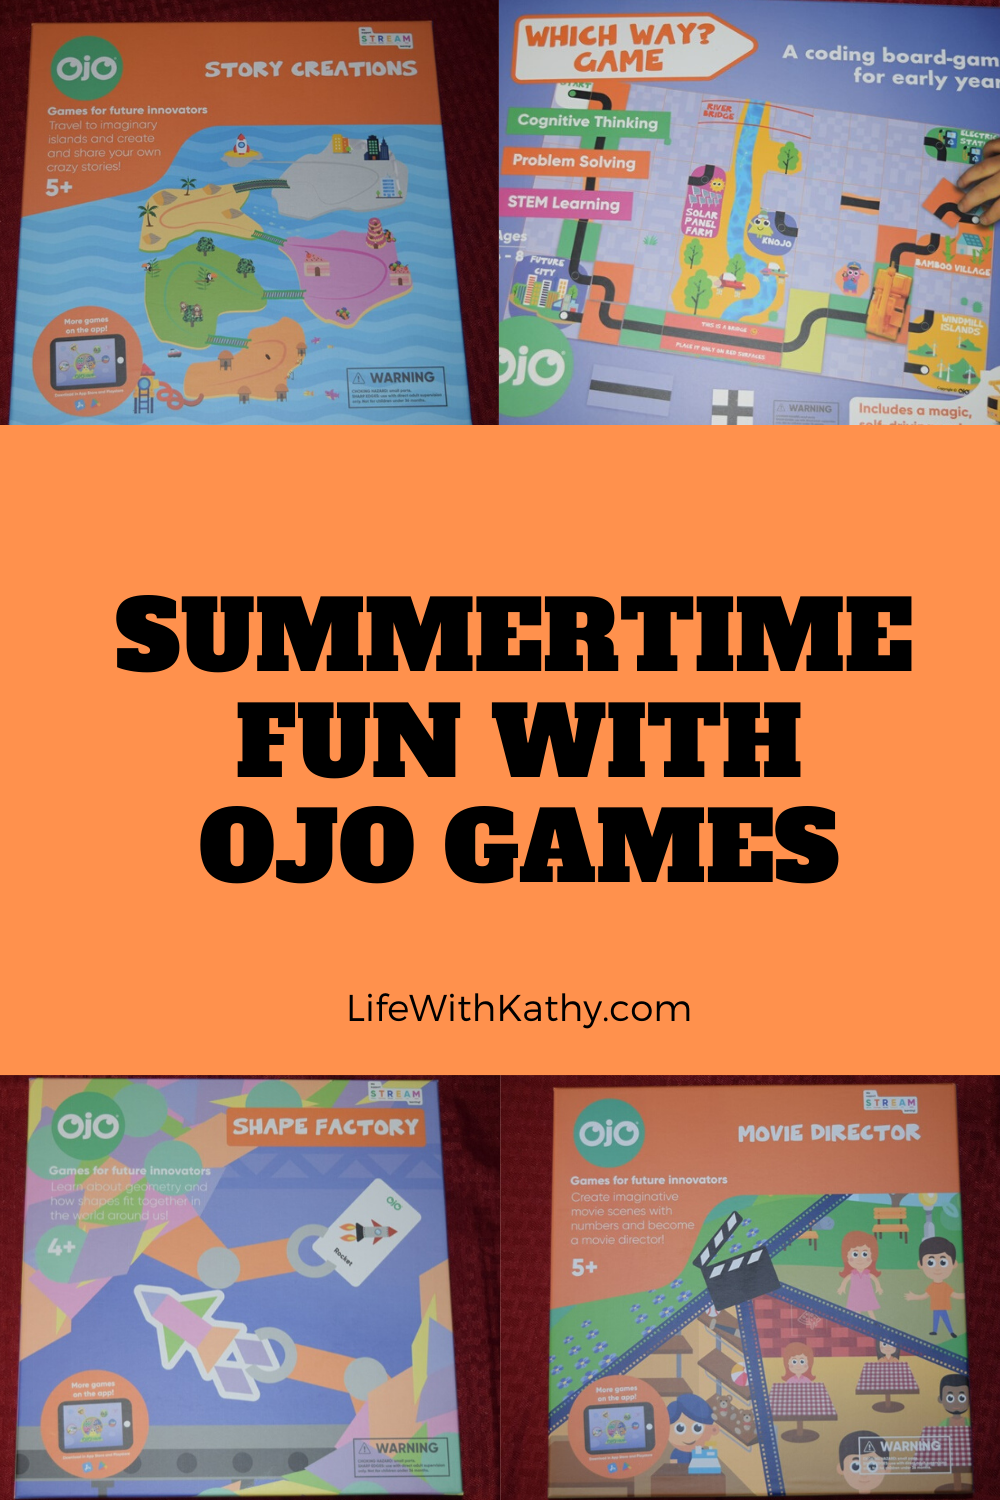 Age 5 Years and up . a Math Board Game for Kids Kids Make Movies While Learning Math and Problem Solving. OjO Movie Director 